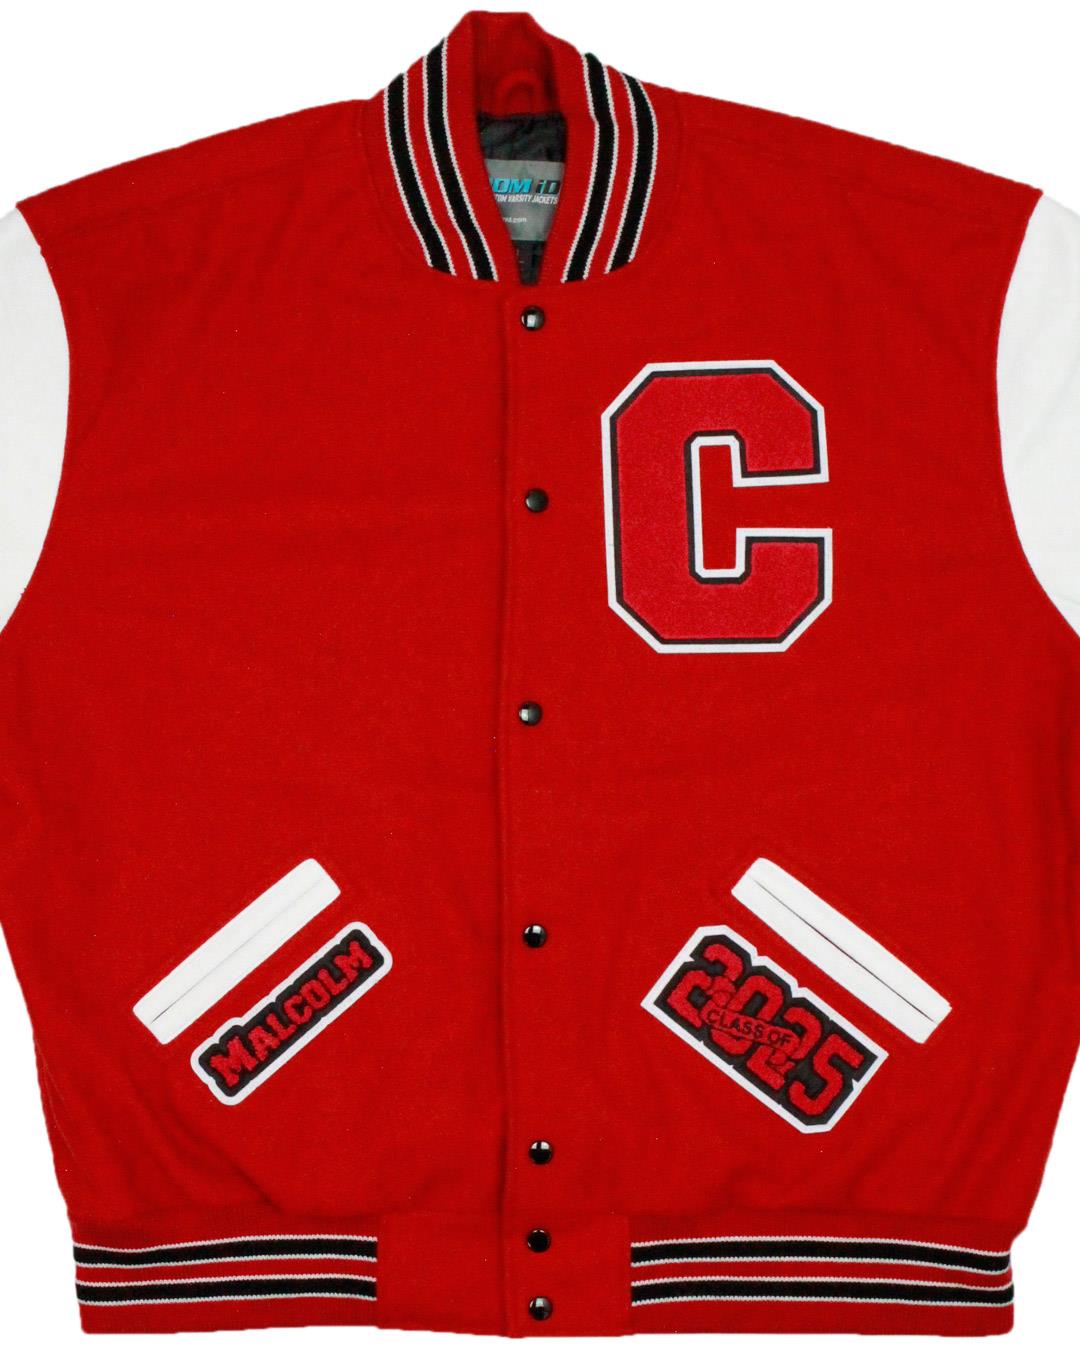 Cliff High School Cowboys/Cowgirls Letter Jacket, Cliff, NM - Front